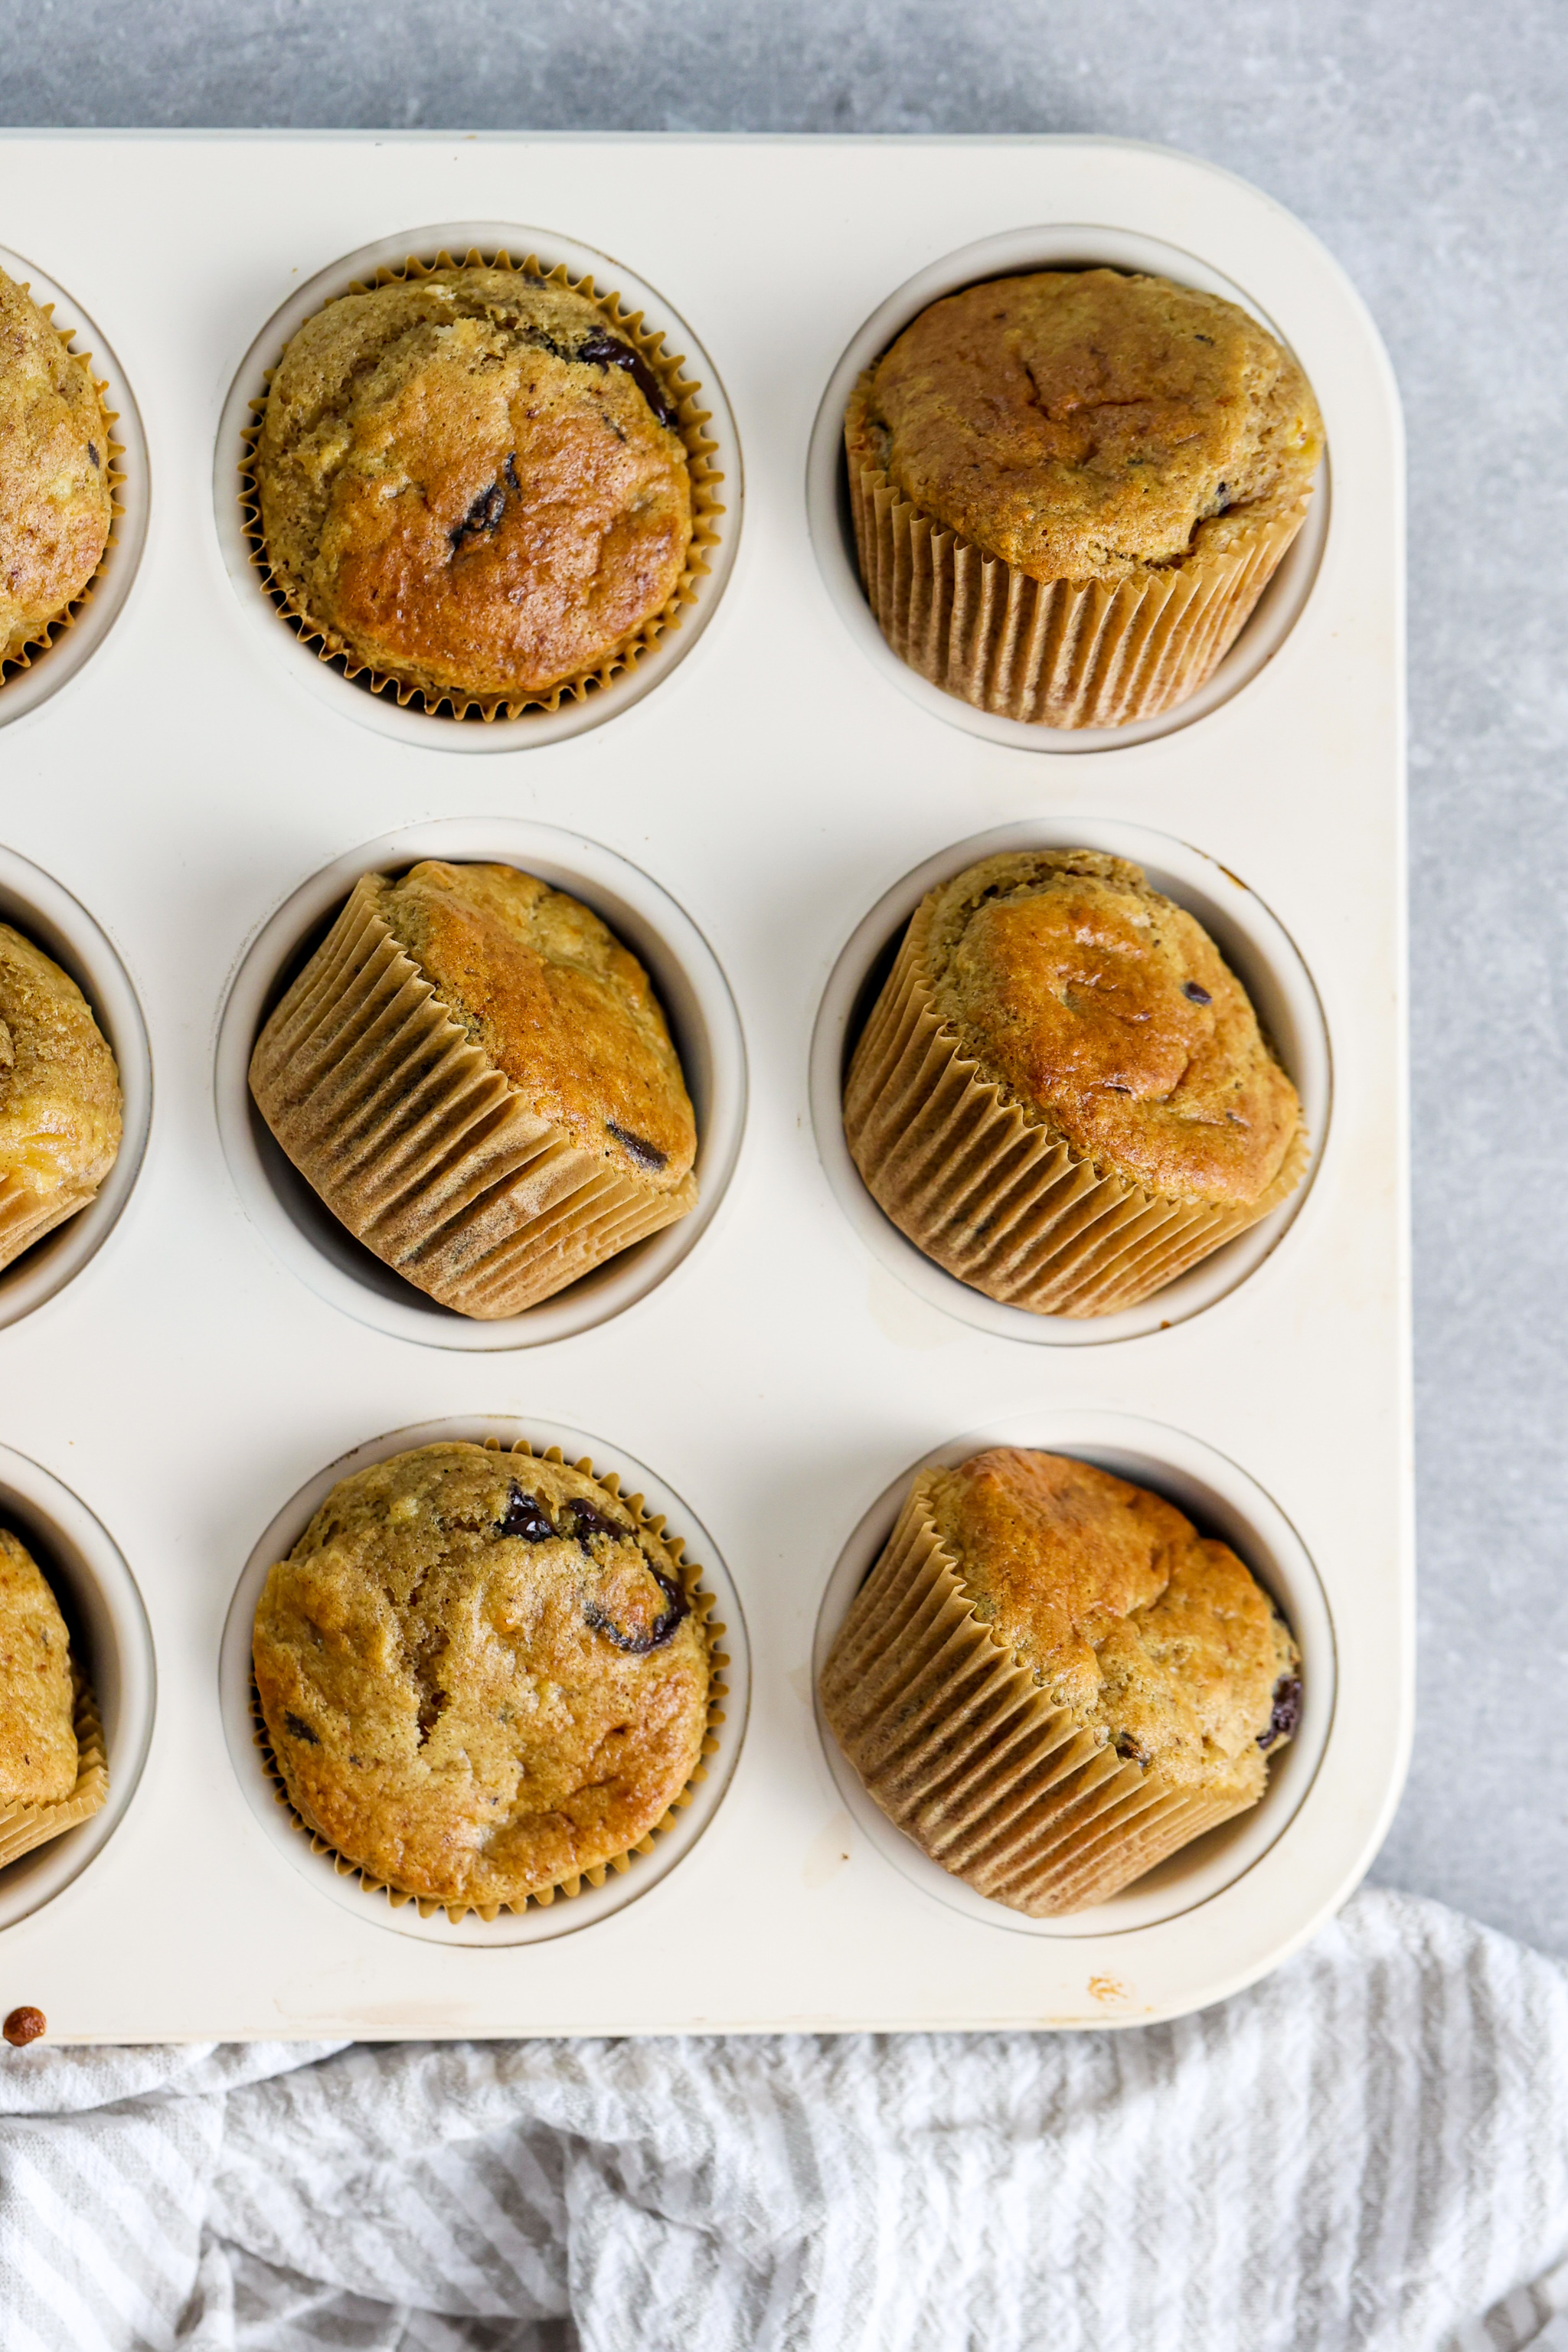 Muffins in muffin tin with grey background for food photography styling.